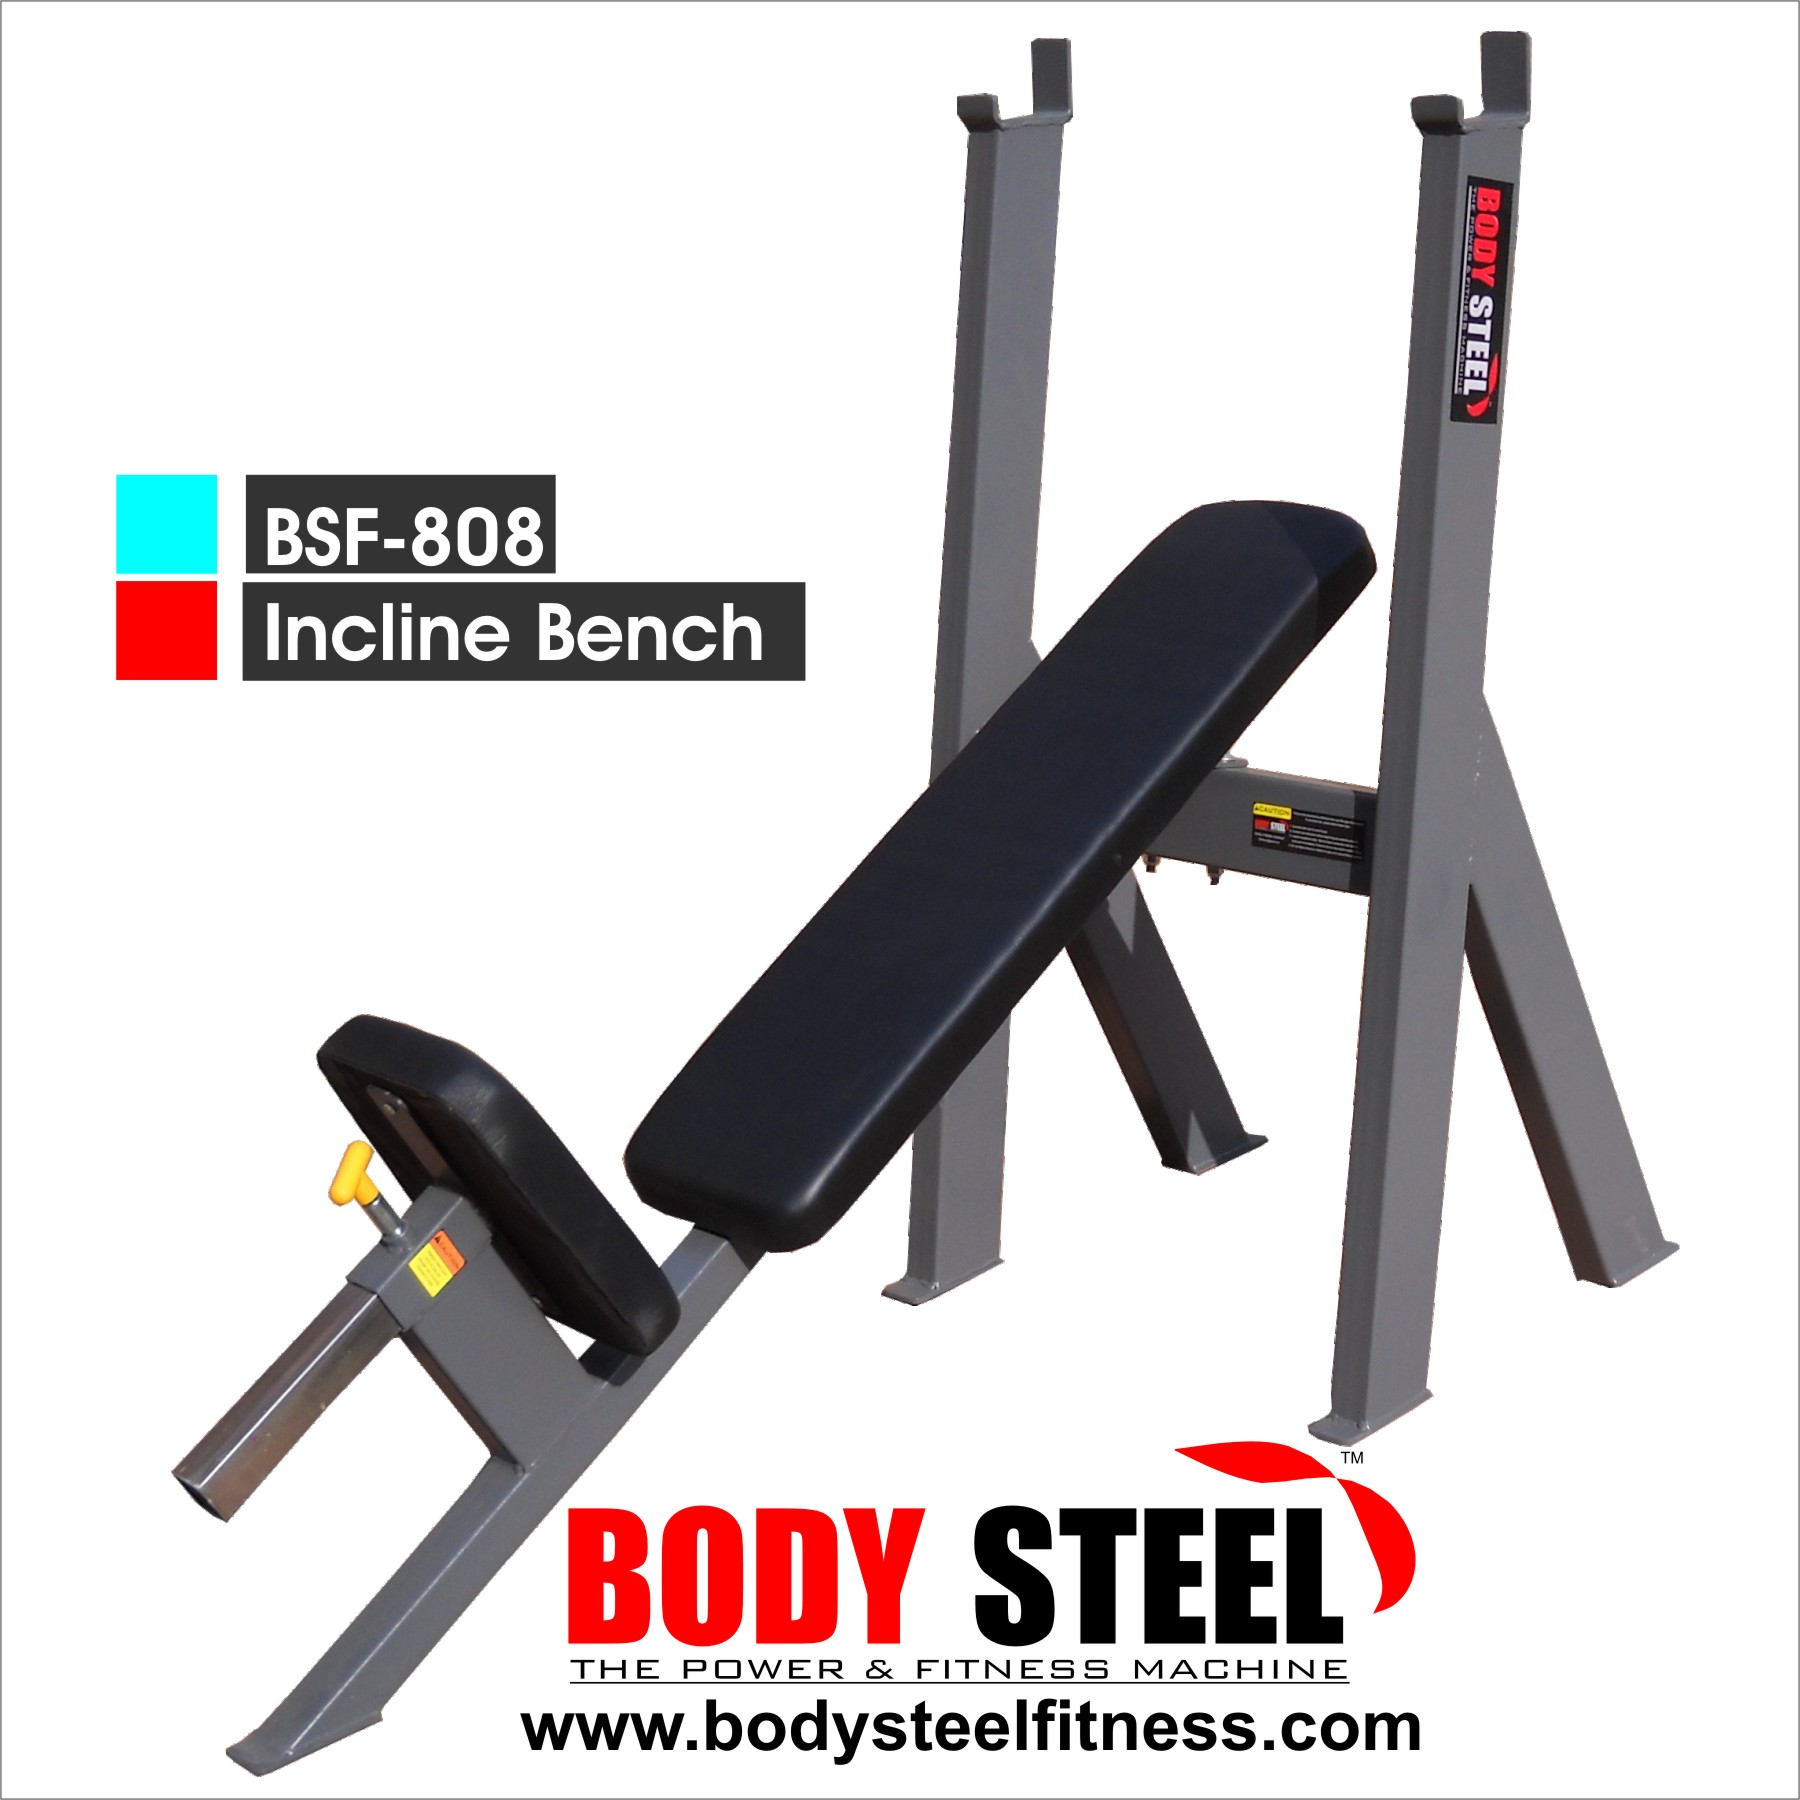 >Incline Bench 